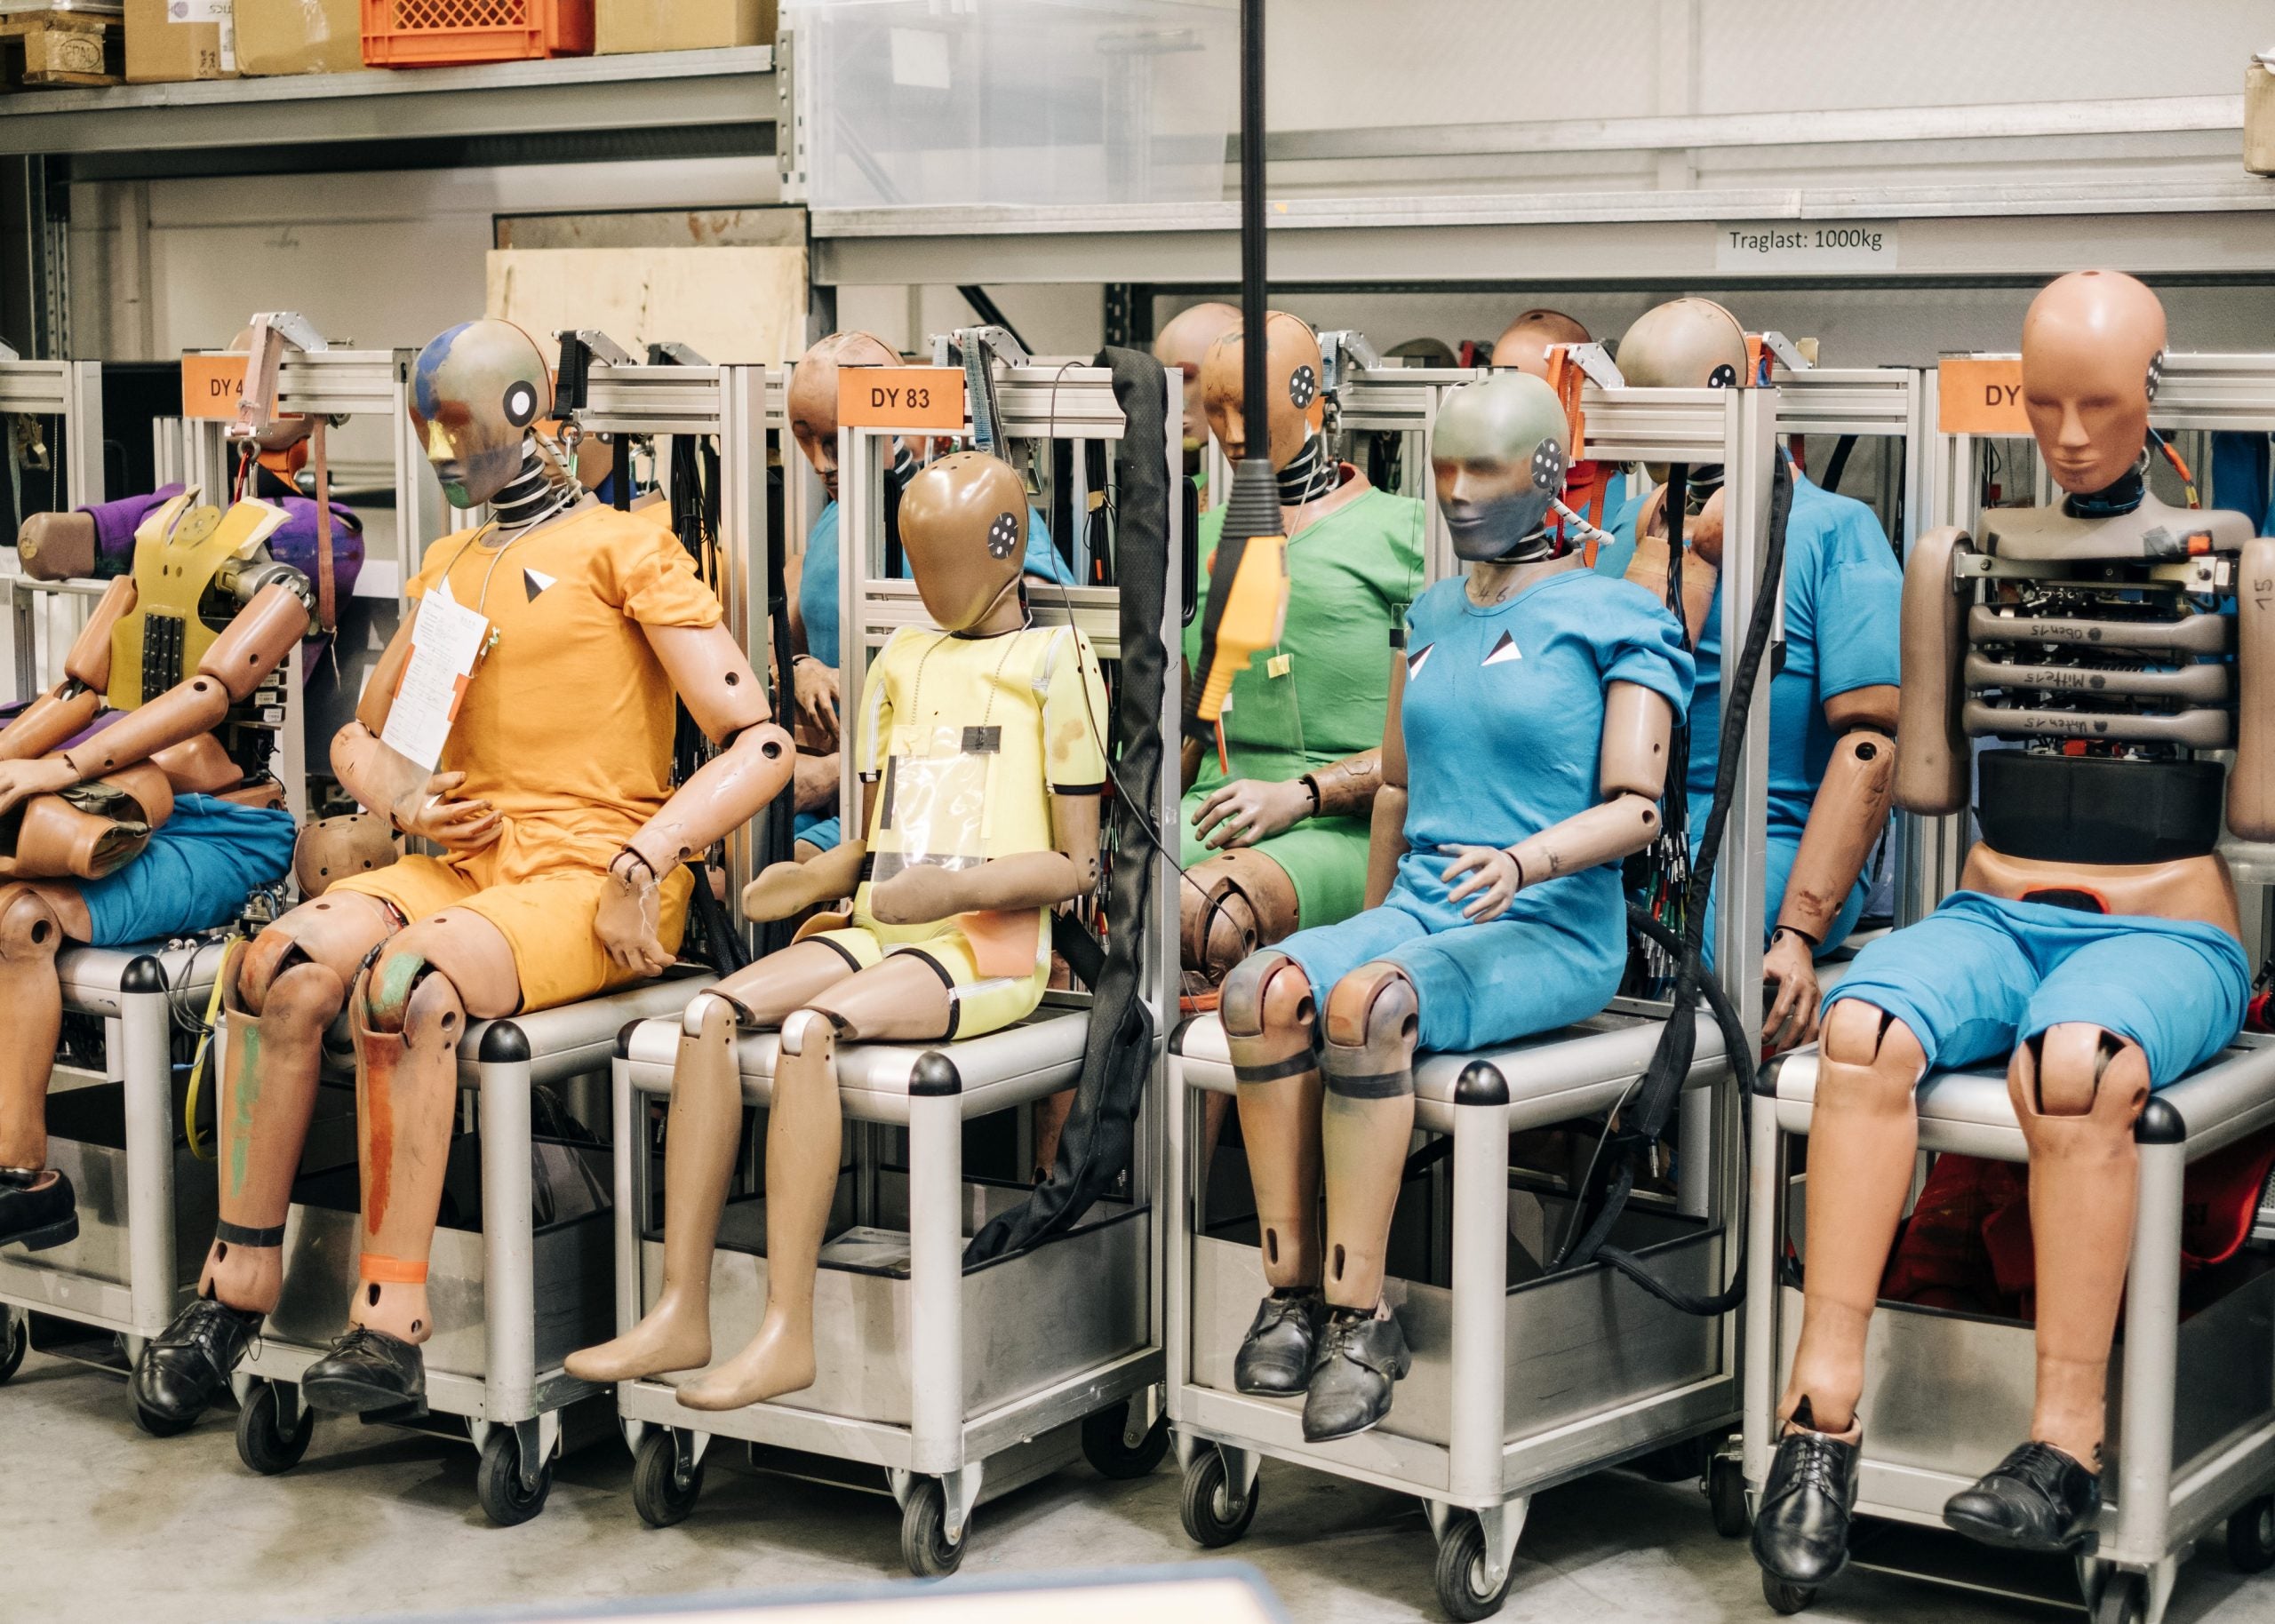 Could Female Crash Test Dummies Improve Car Safety For All?